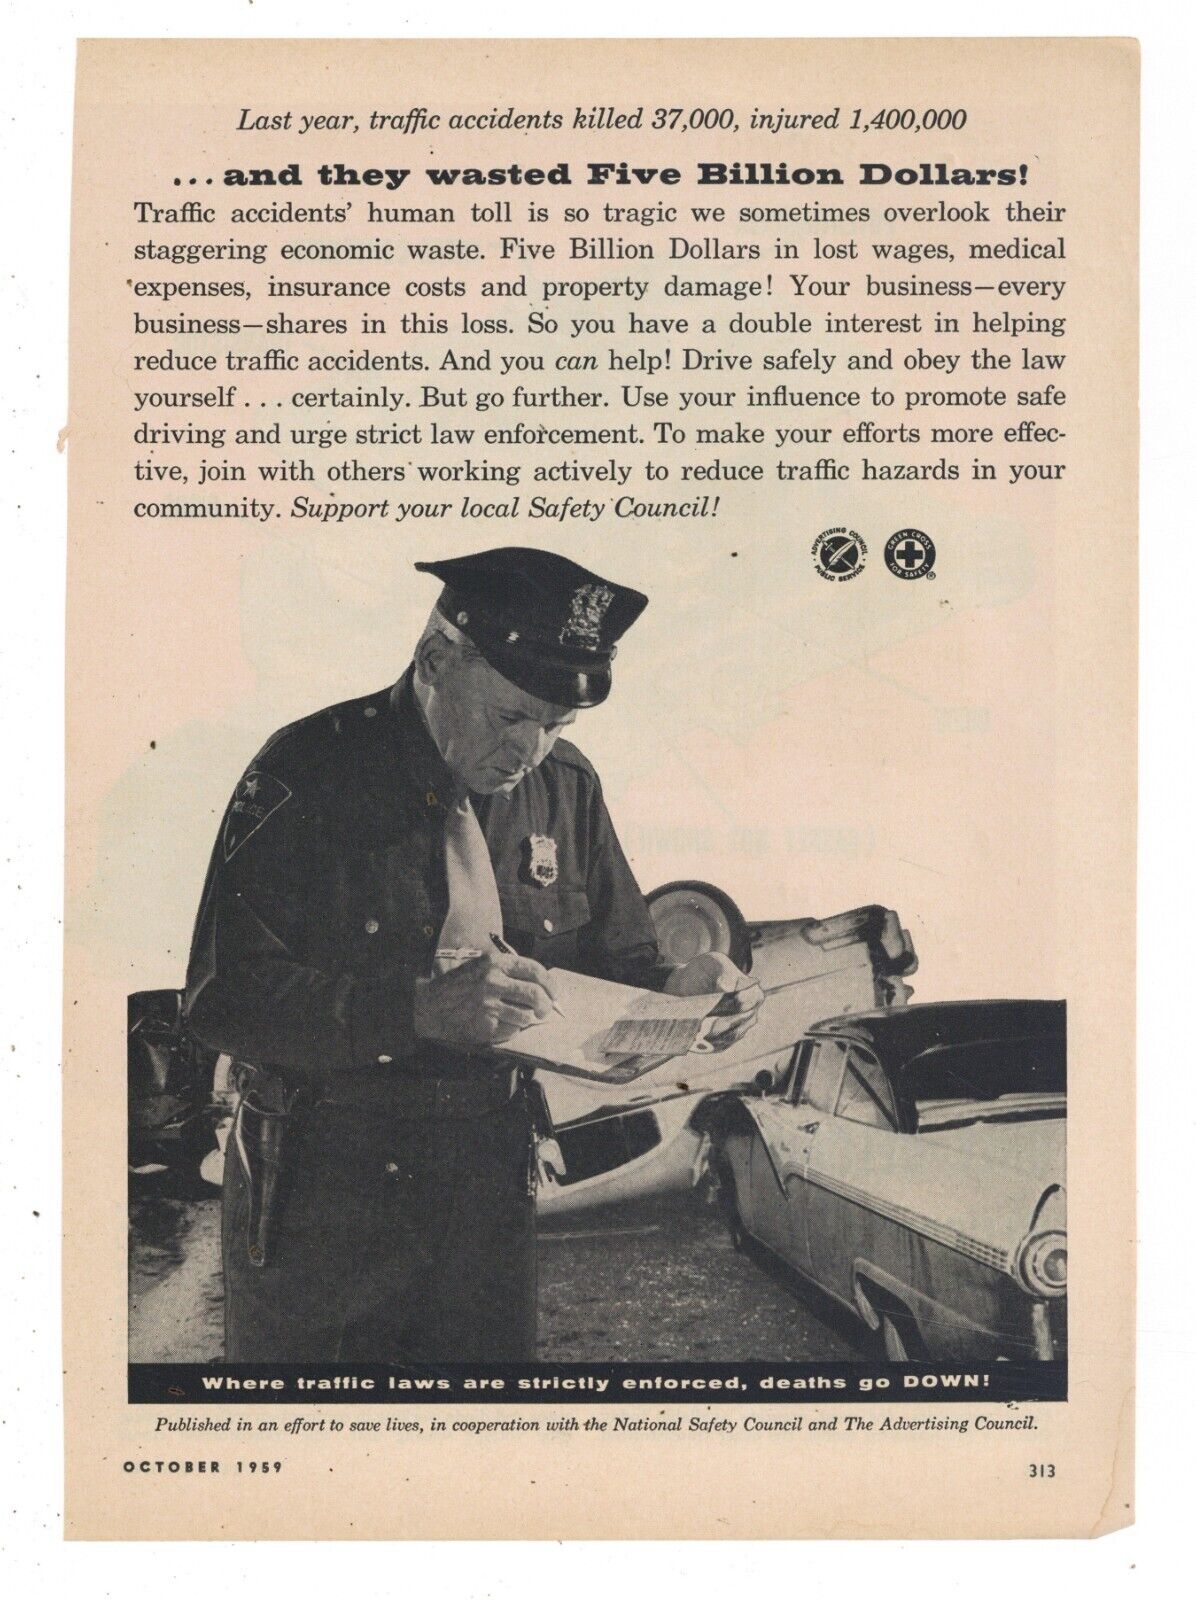 1959 National Safety Council Ad: Traffic Accident Fatalities/Injuries for 1958